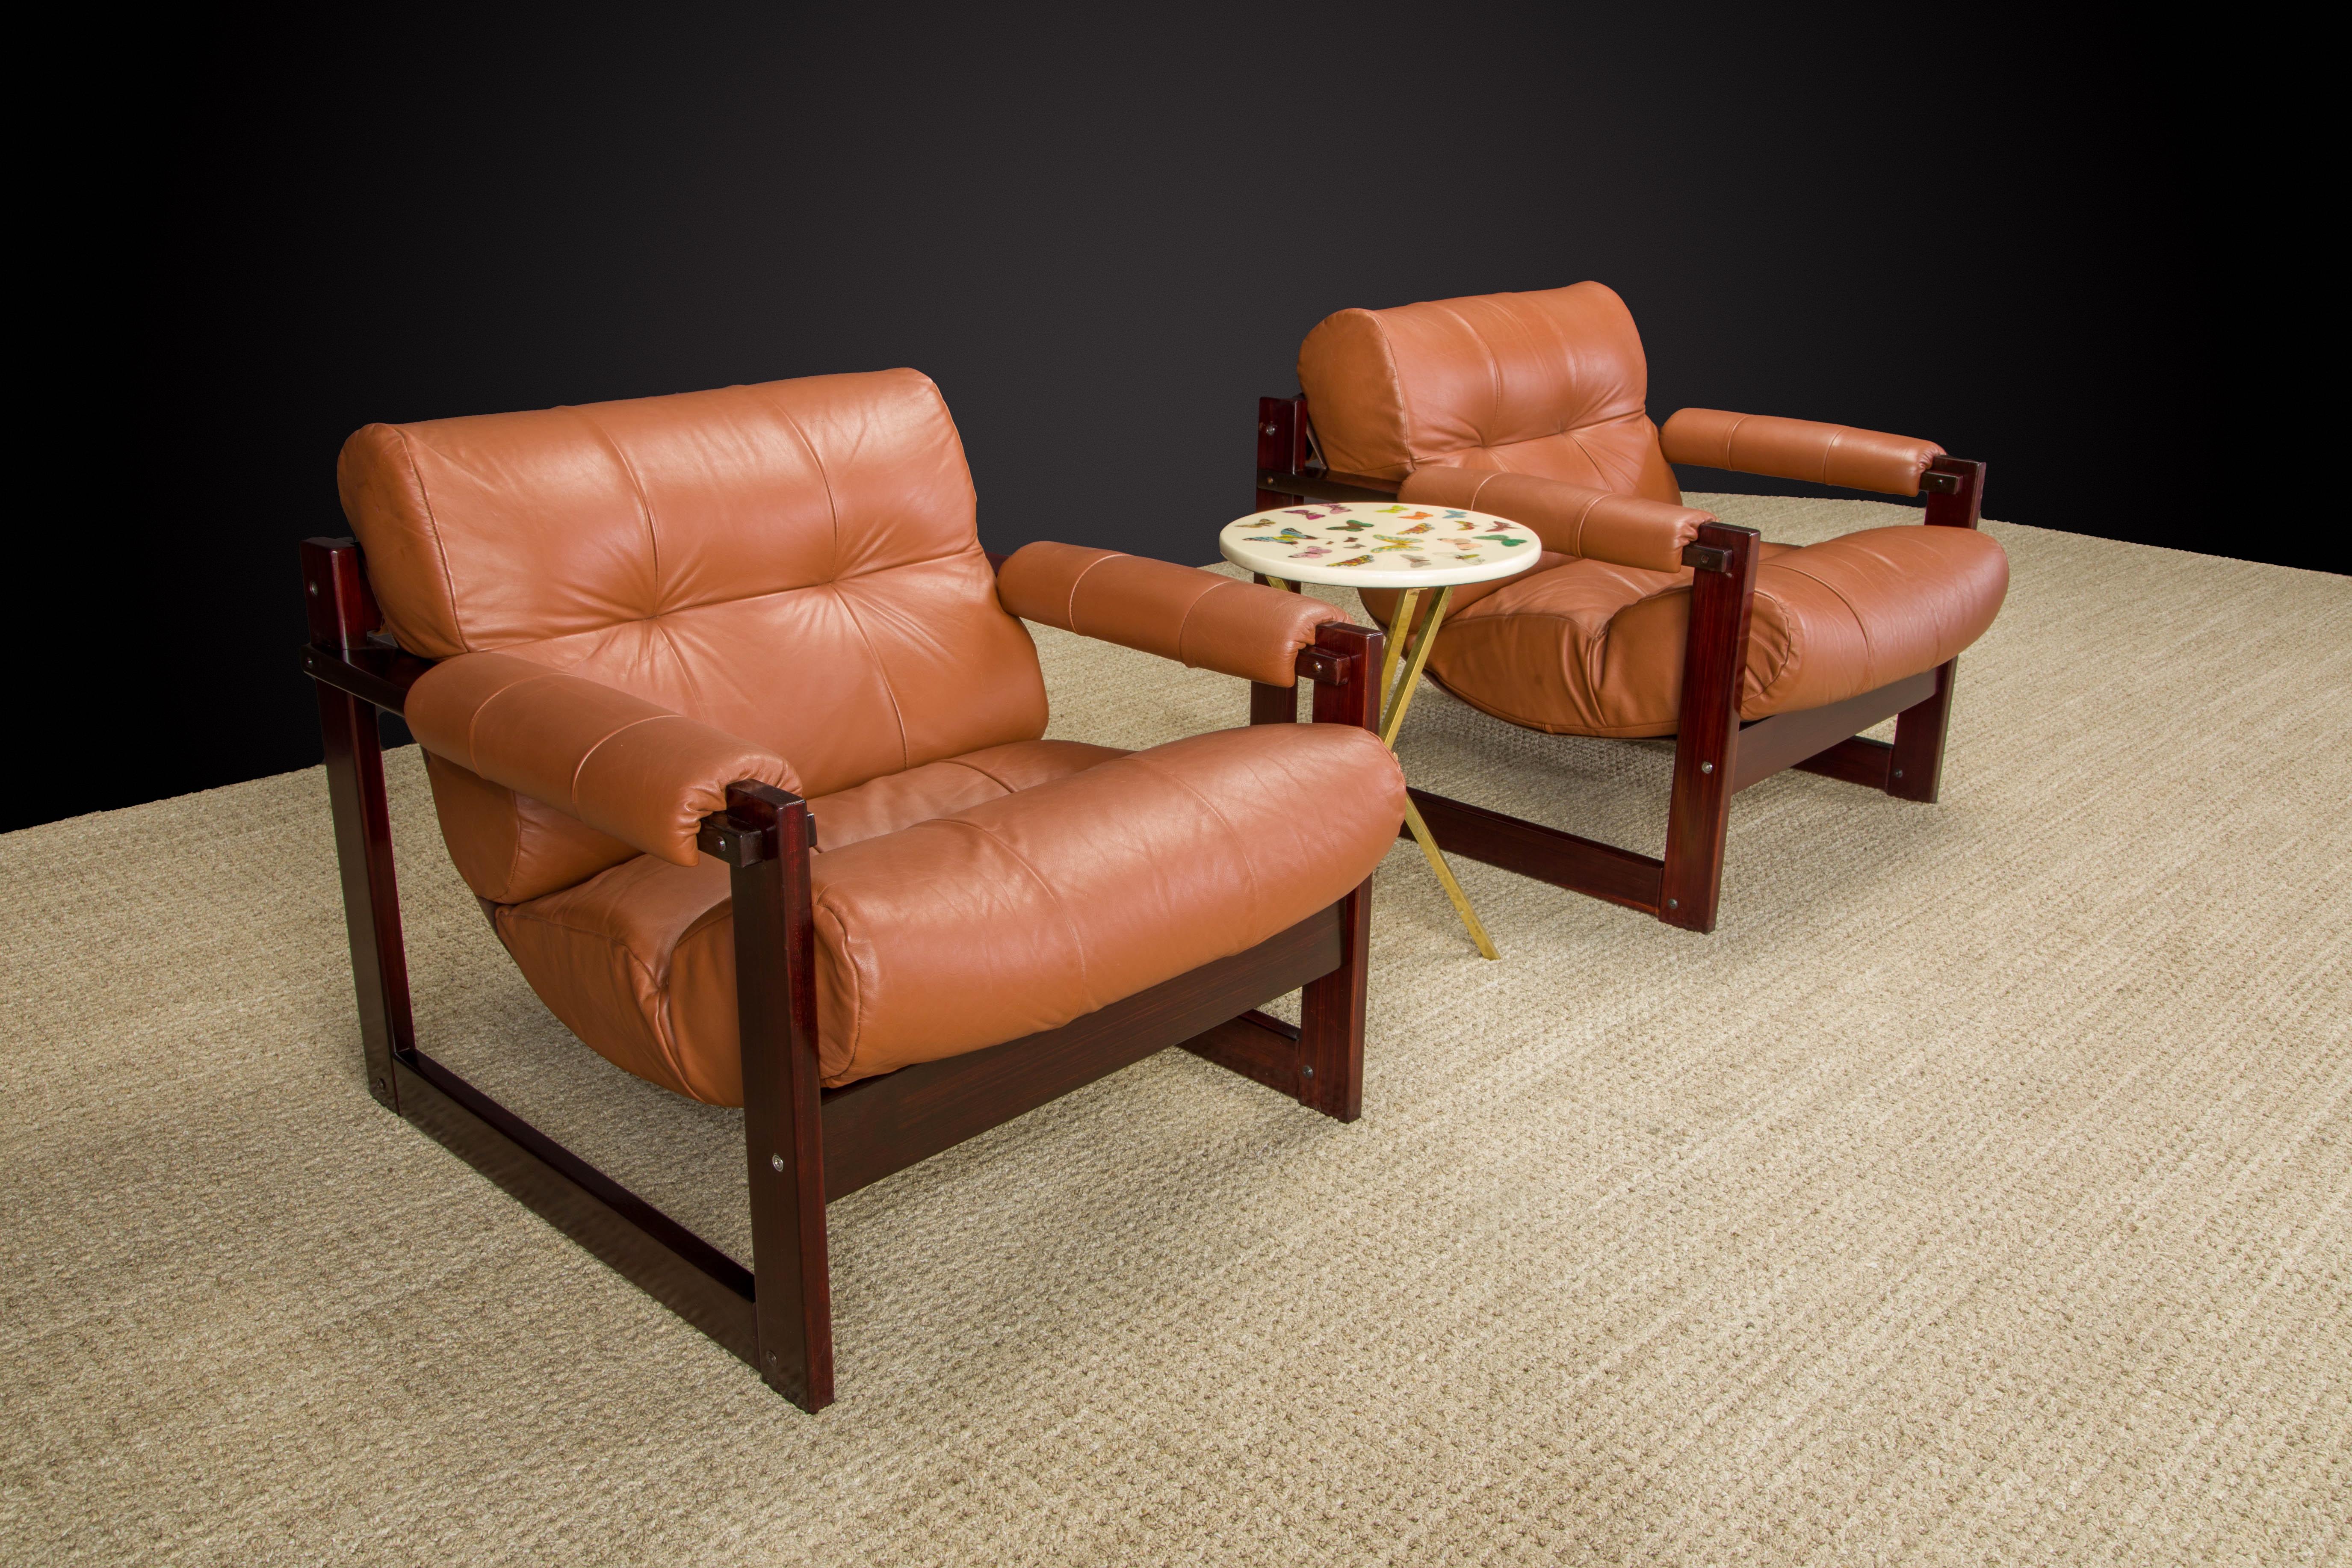 Mid-Century Modern Percival Lafer 'S-1' Rosewood and Leather Lounge Chairs, Brazil, 1976, Signed For Sale